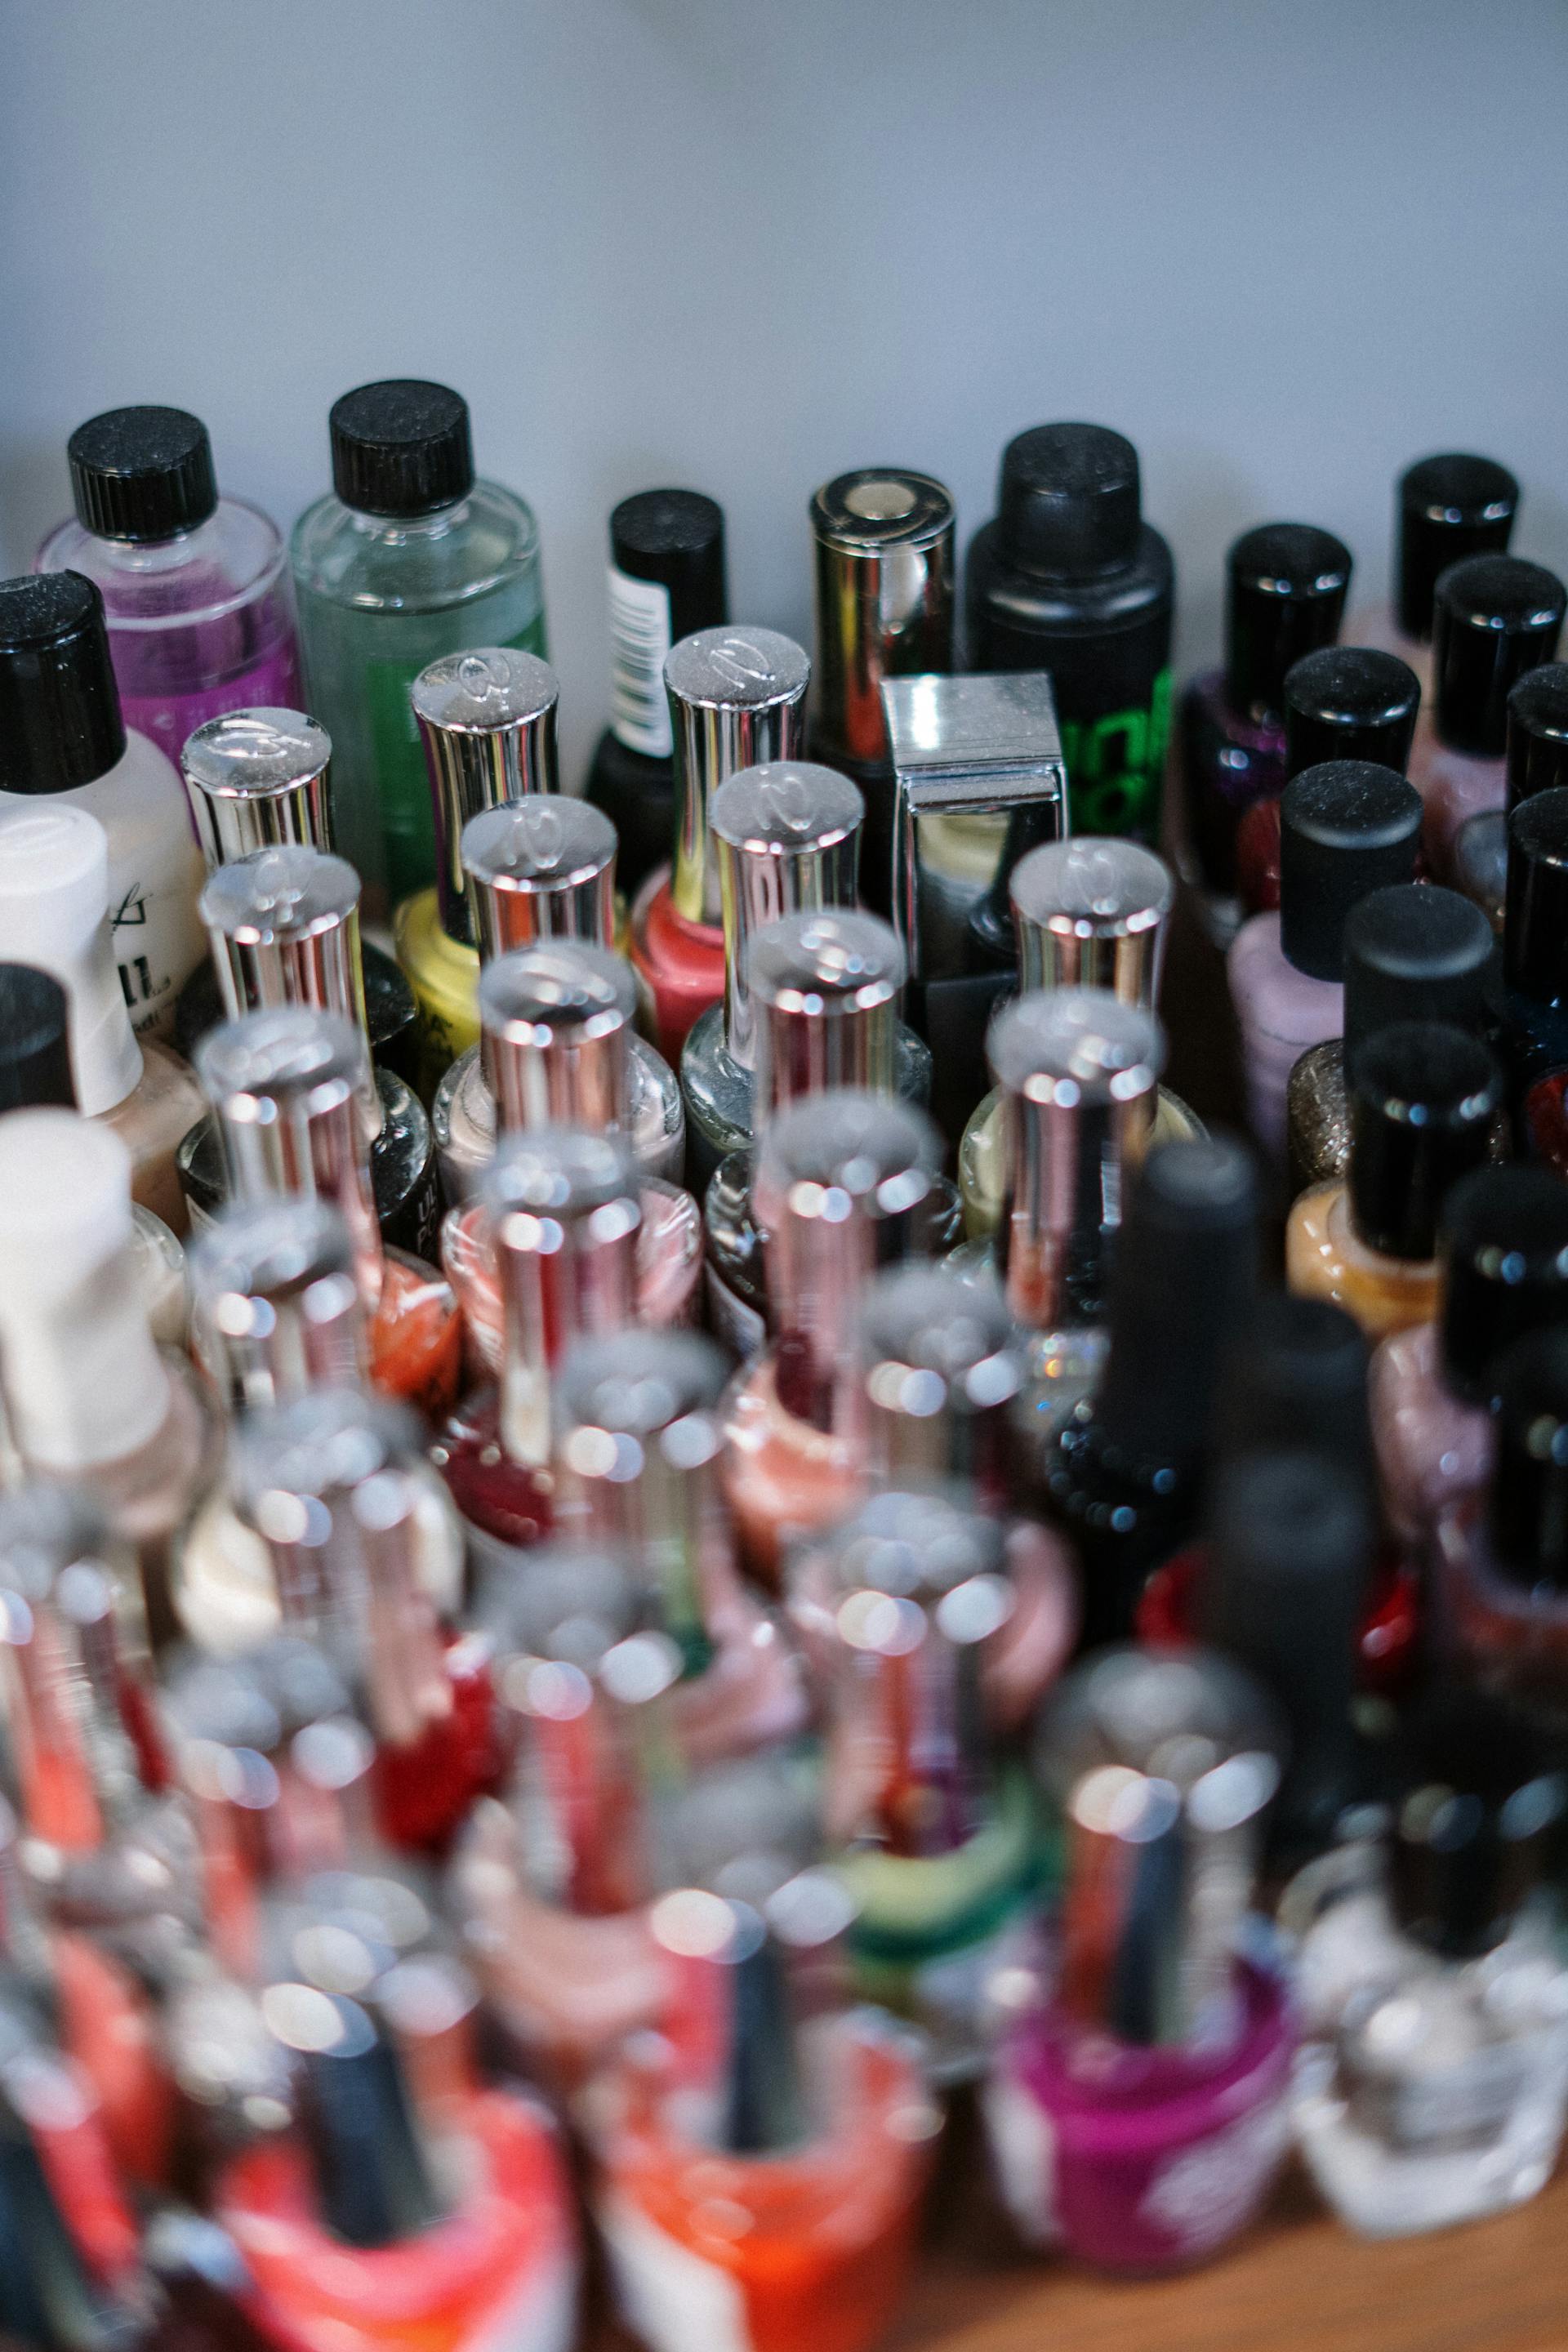 Different bottles of nail polish | Source: Pexels